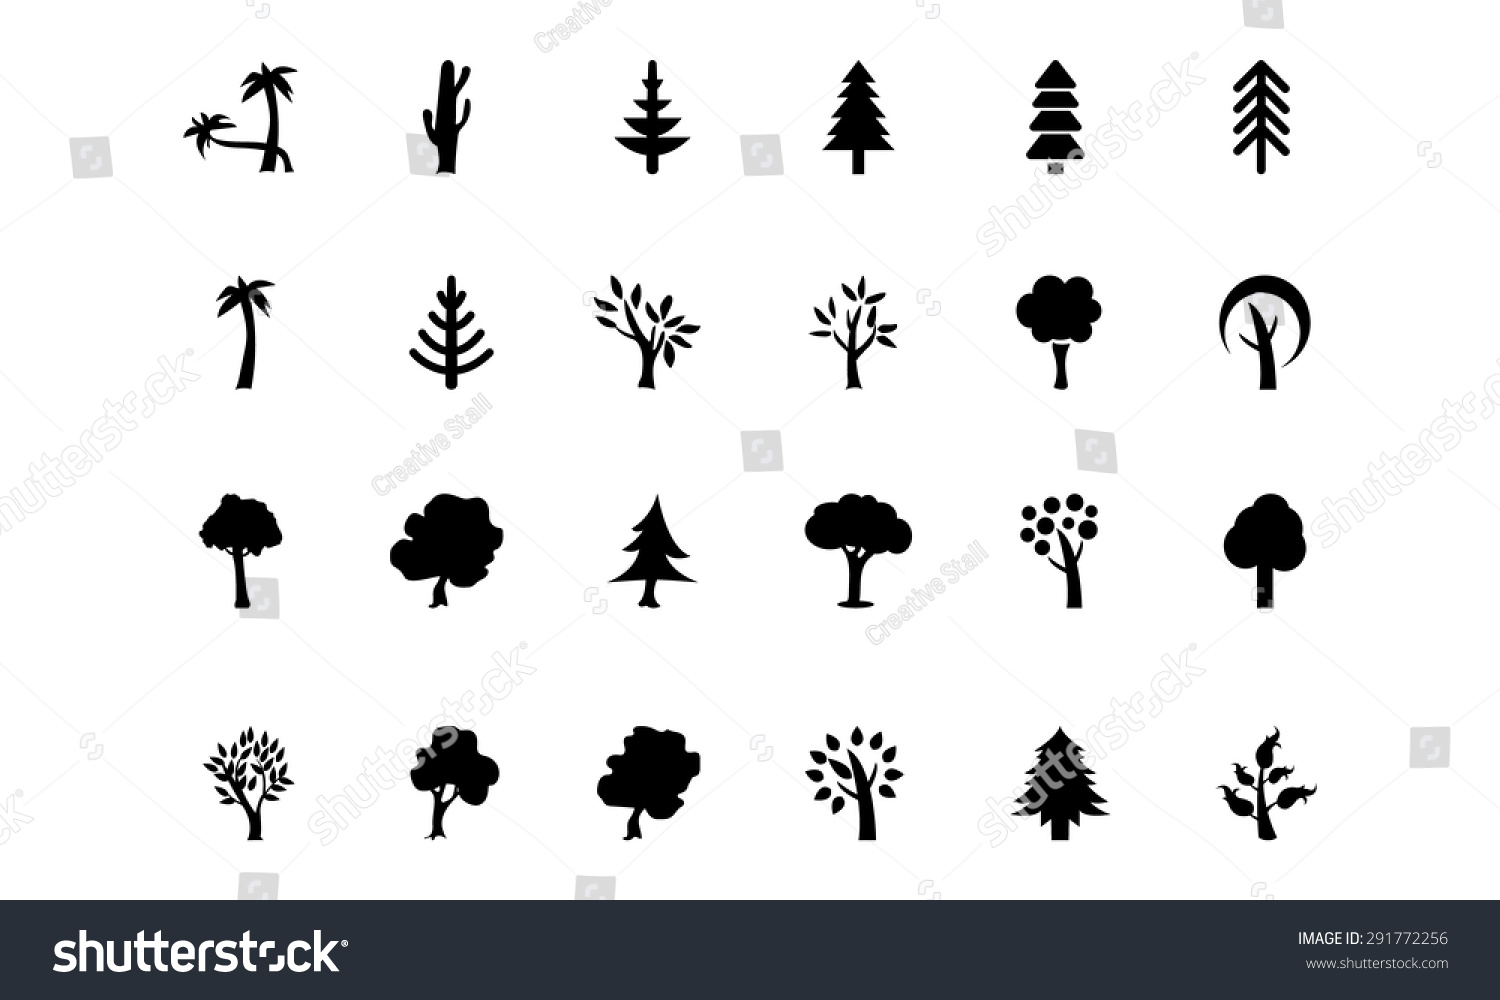 SVG of Trees Vector Icons svg